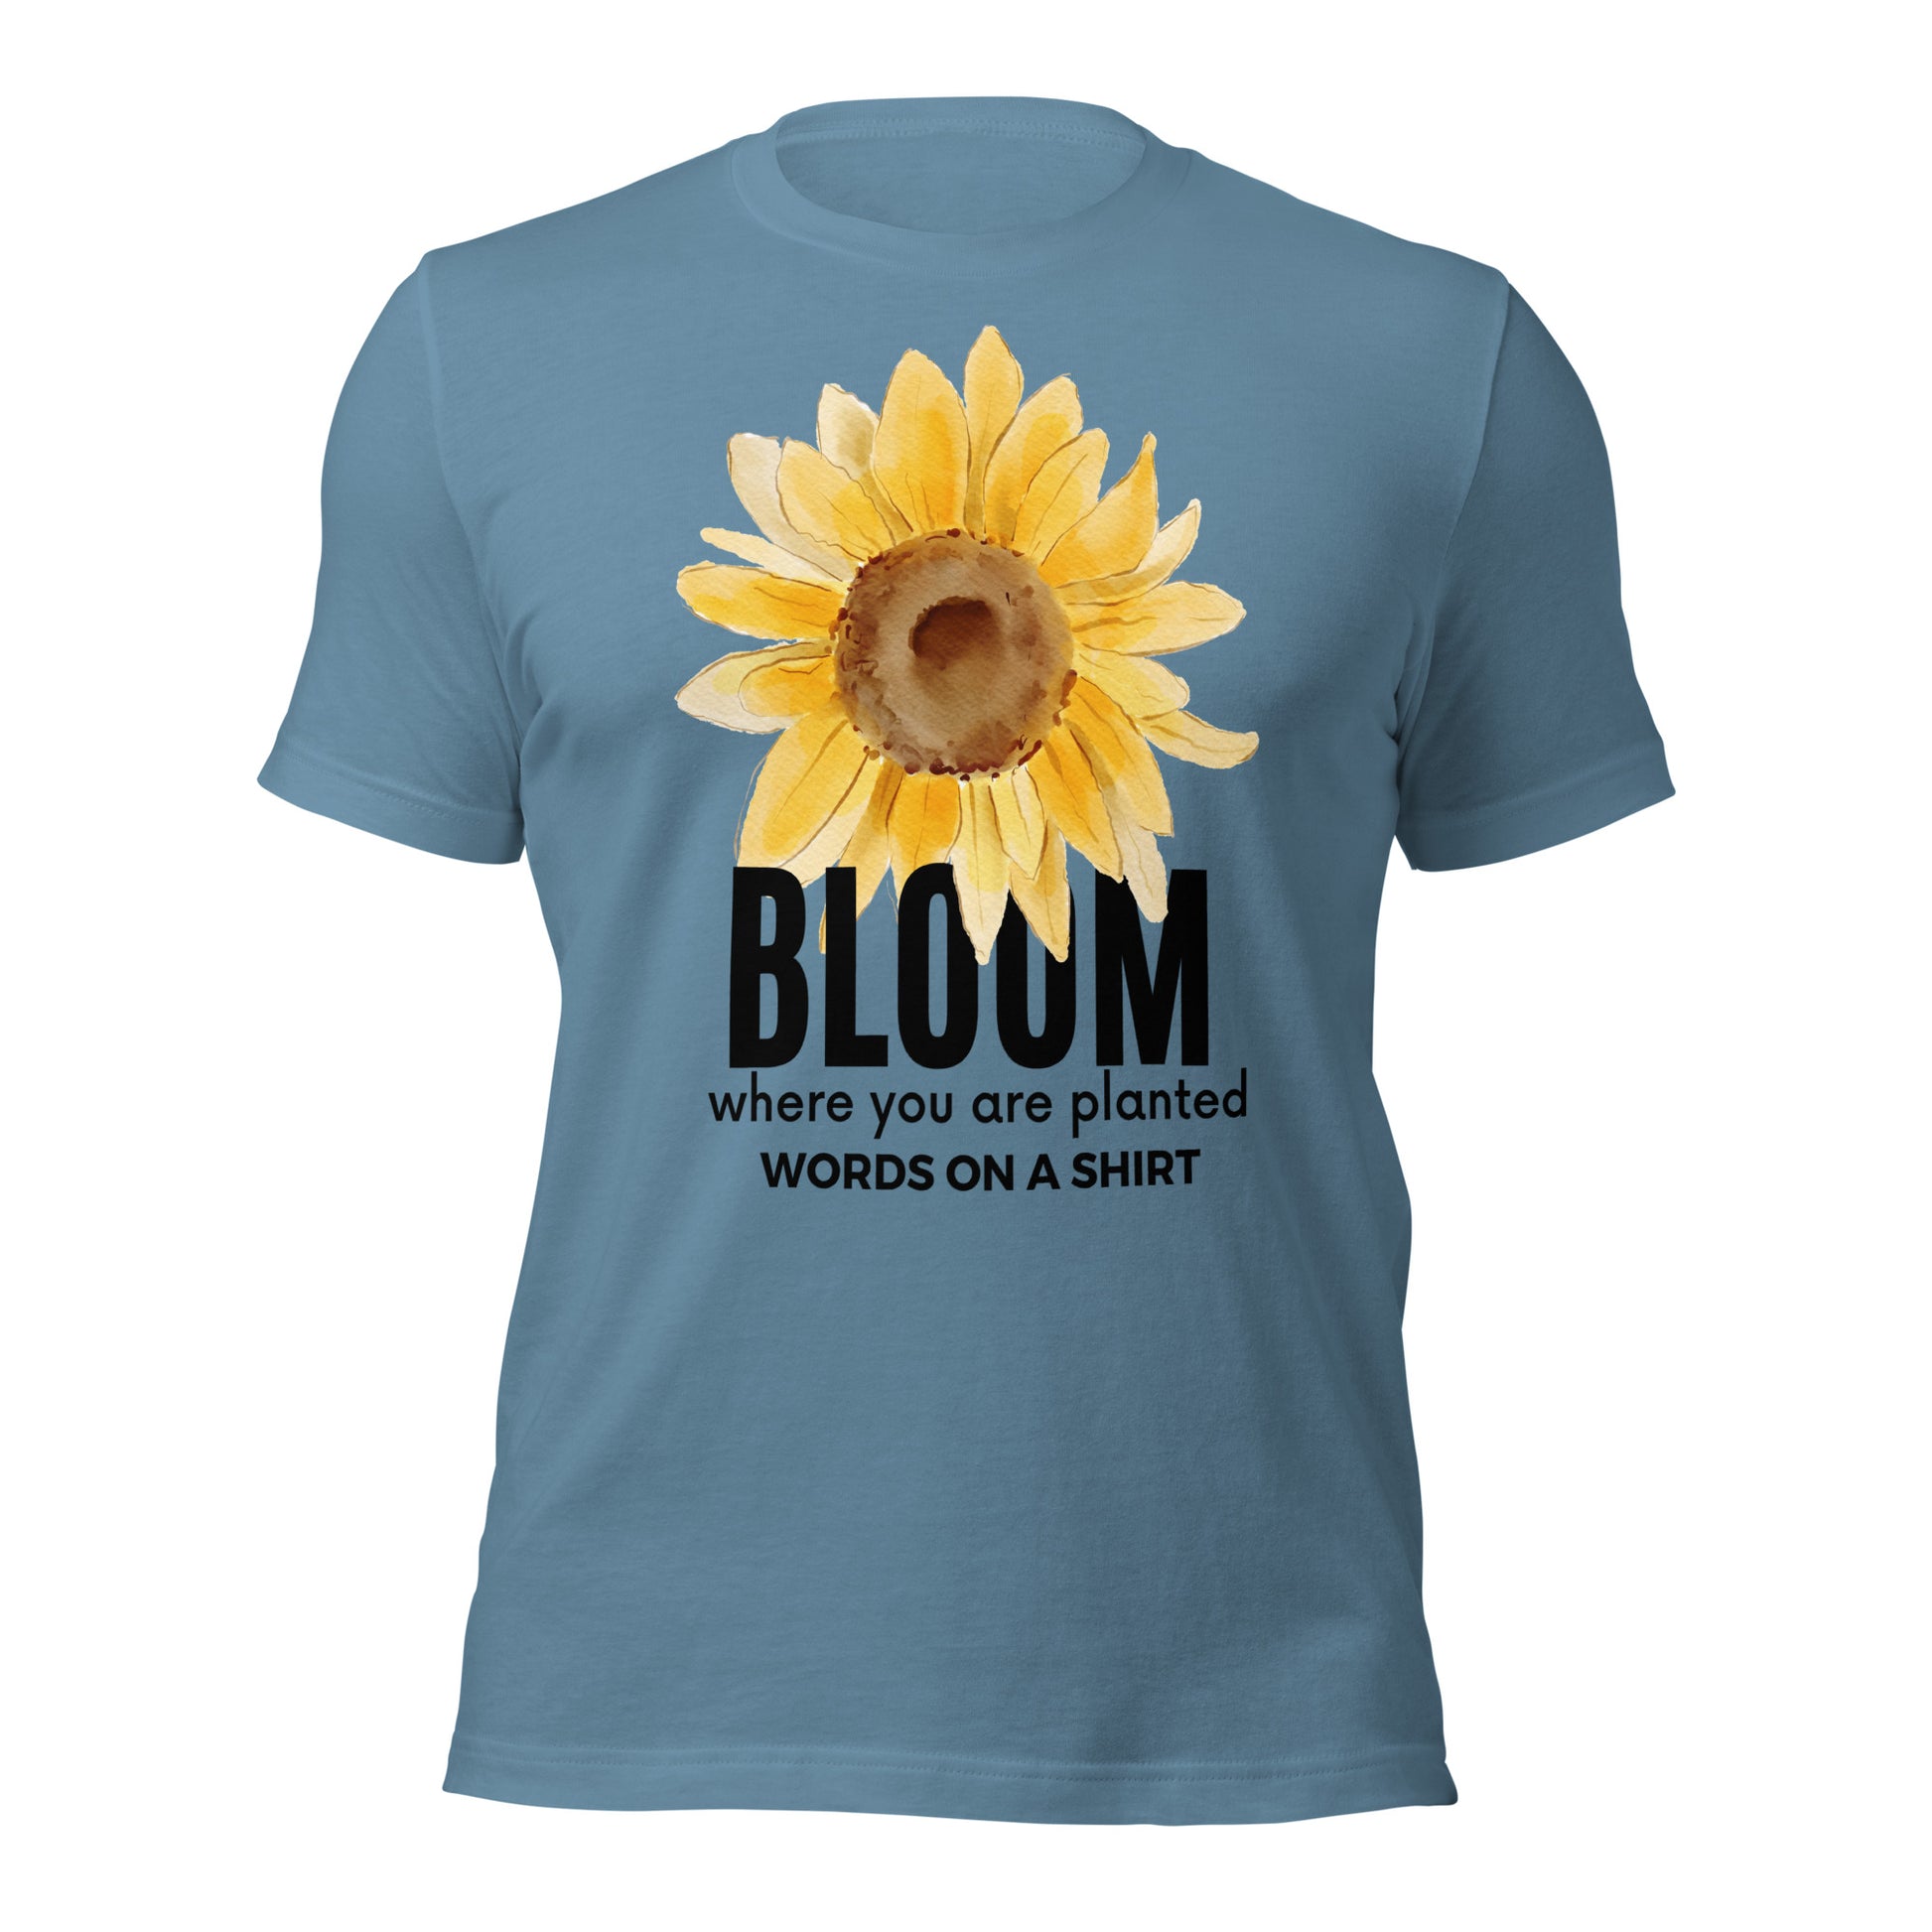 This unisex T-shirt is far superior to other products on the market, providing a unique combination of comfort, breathability, and flexibility with every wear. A special design sets it apart from the ordinary; plus, with its inspirational slogan, it's sure to bring out the best in any situation.